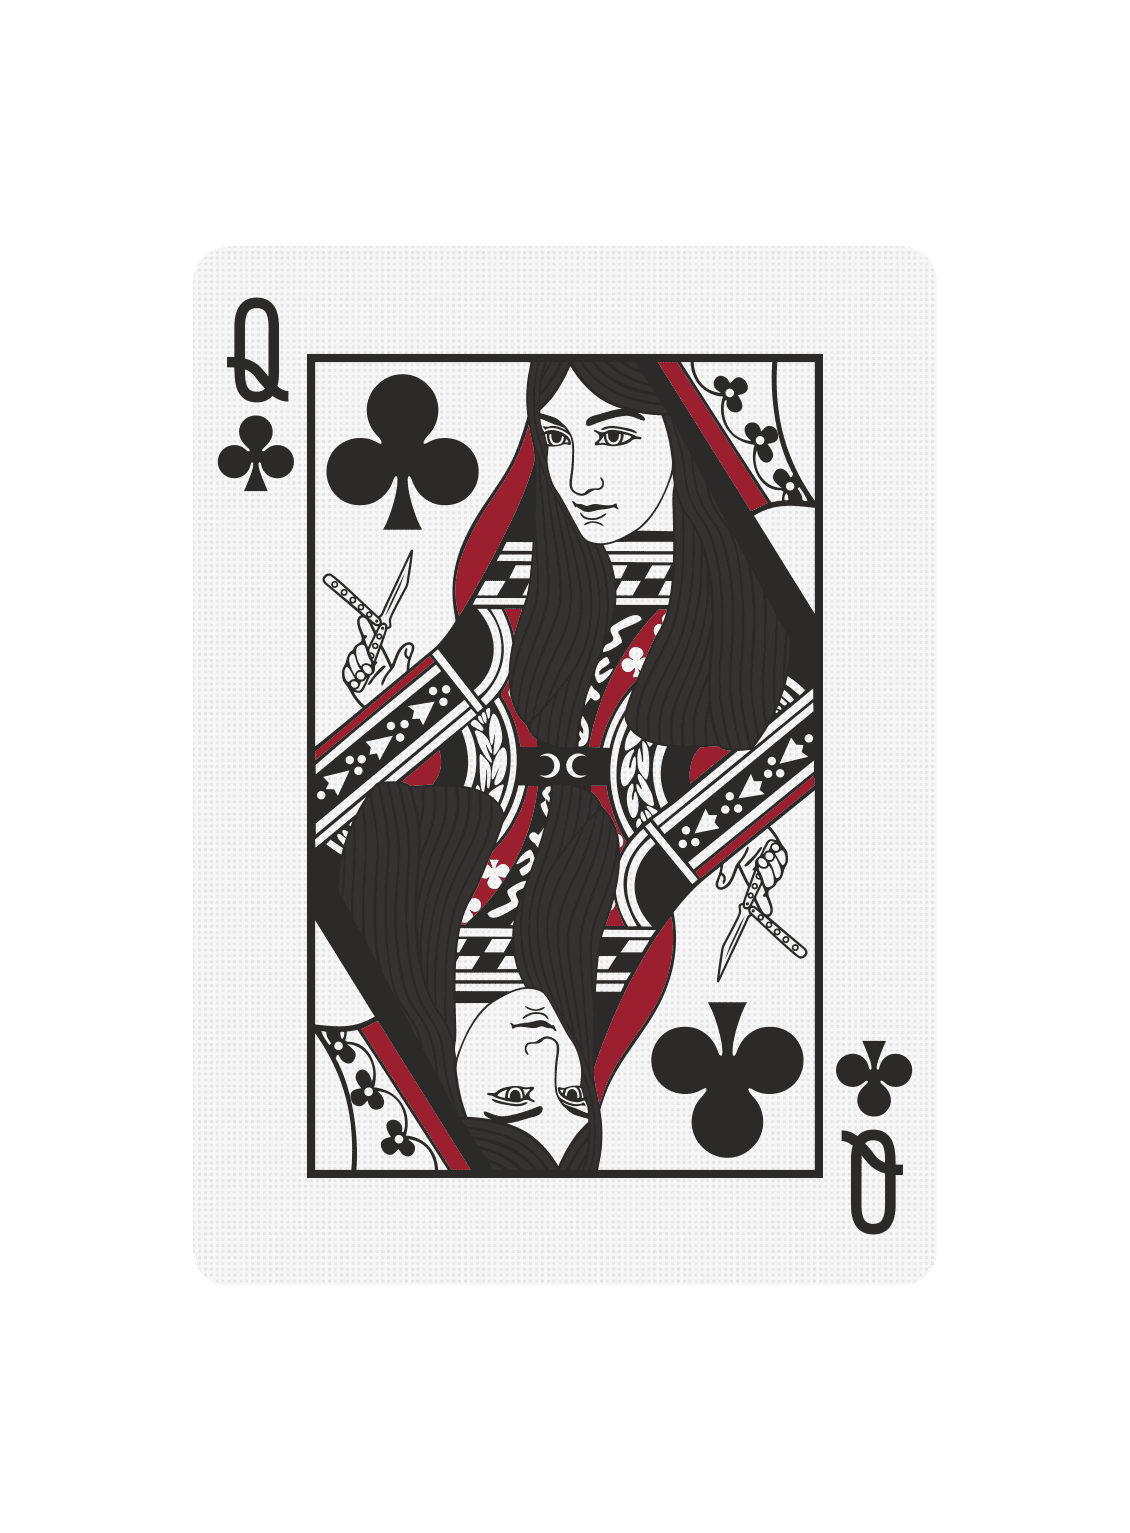 Remedies - Black Roses Playing Cards